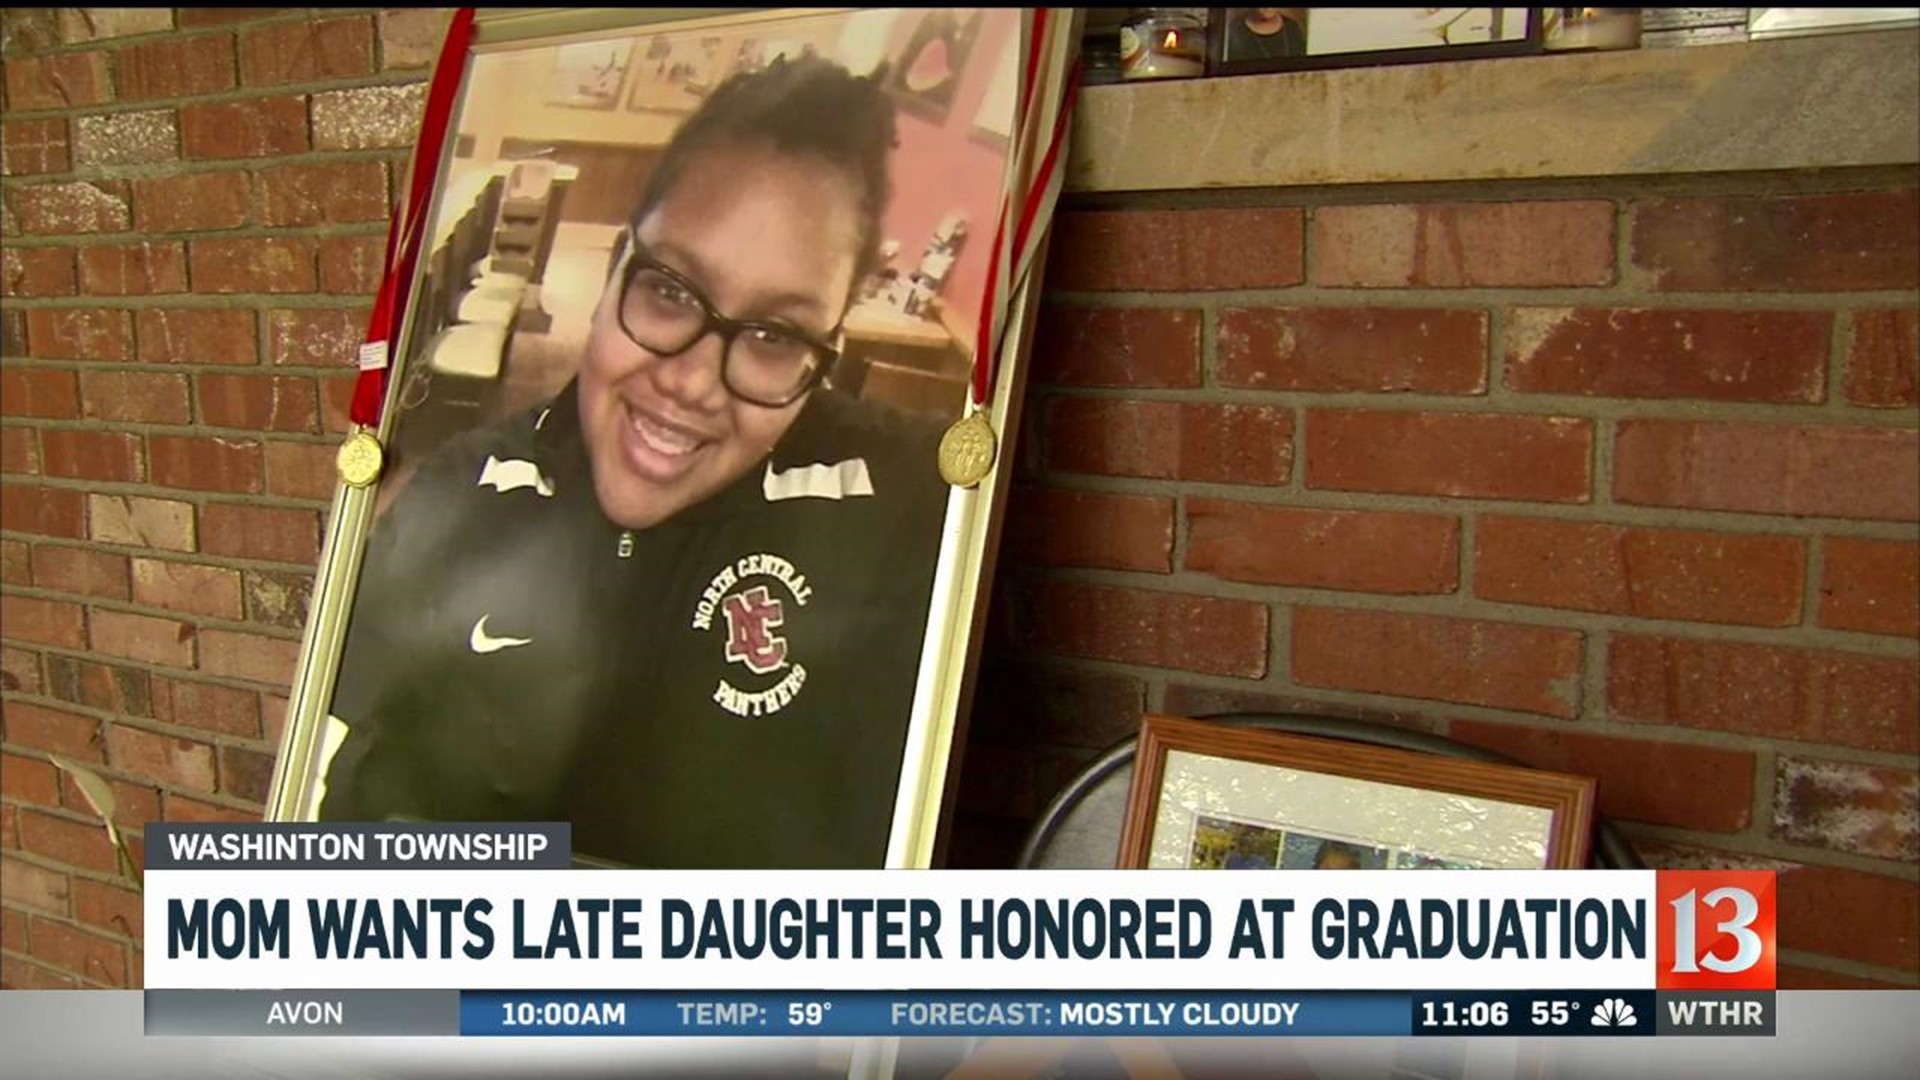 Mom wants to honor daughter at graduation